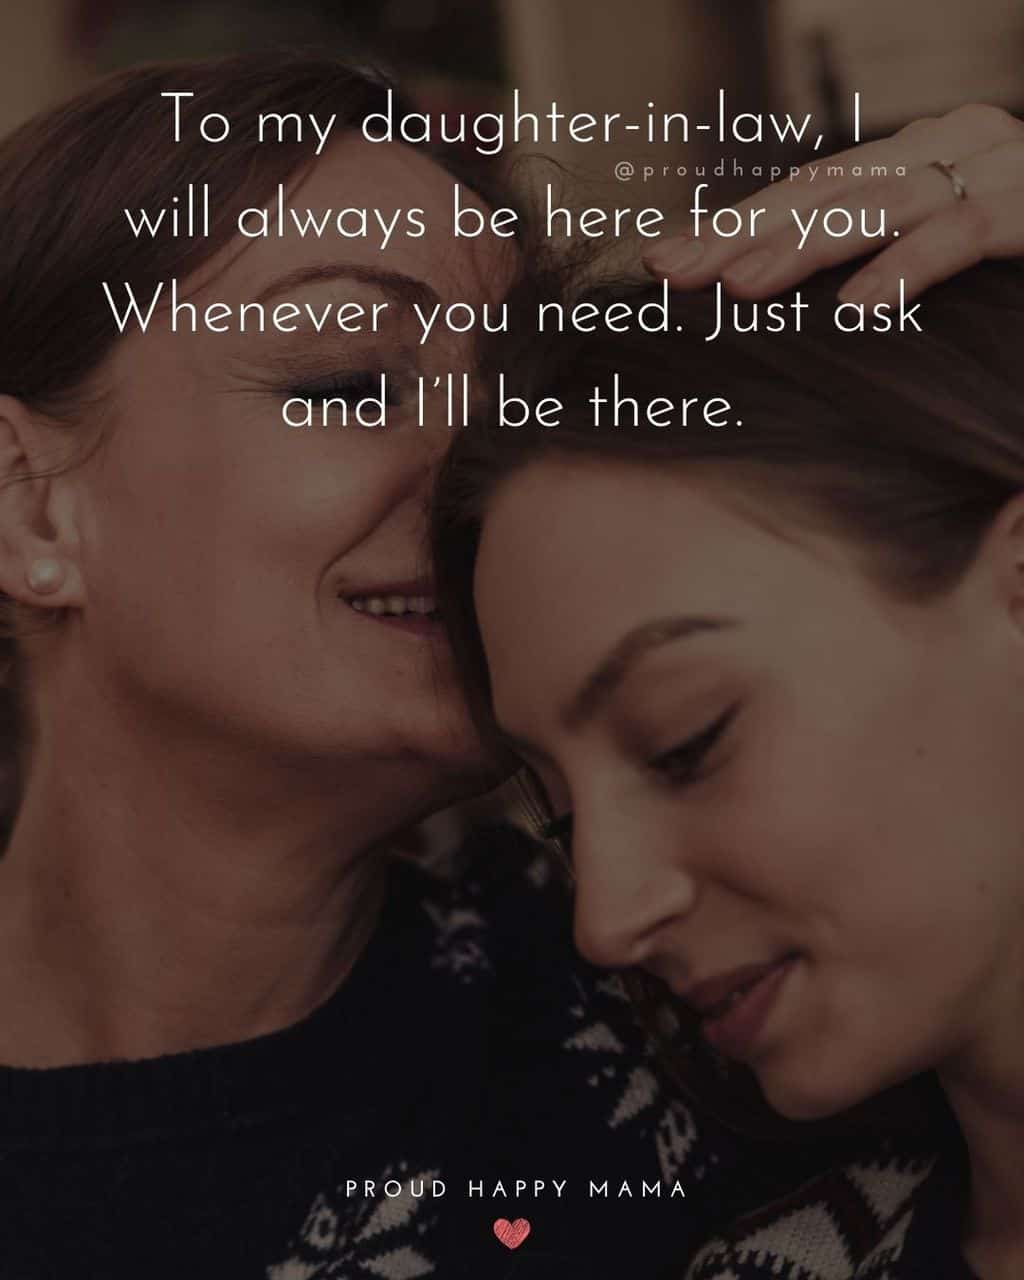 50+ BEST Daughter In Law Quotes And Sayings [With Images]